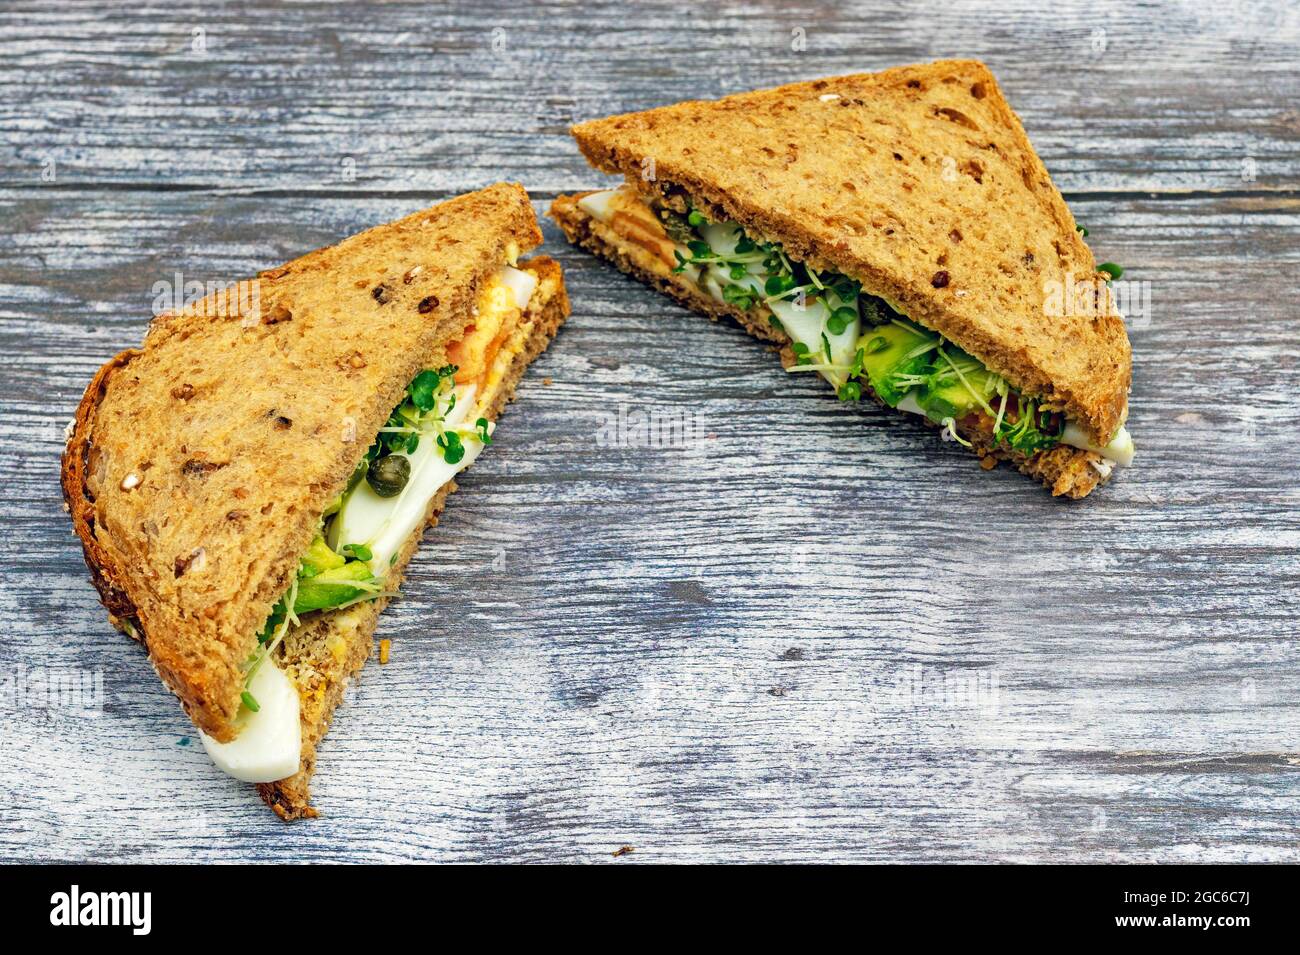 Egg and cress sandwich on wholemeal sliced bread Stock Photo